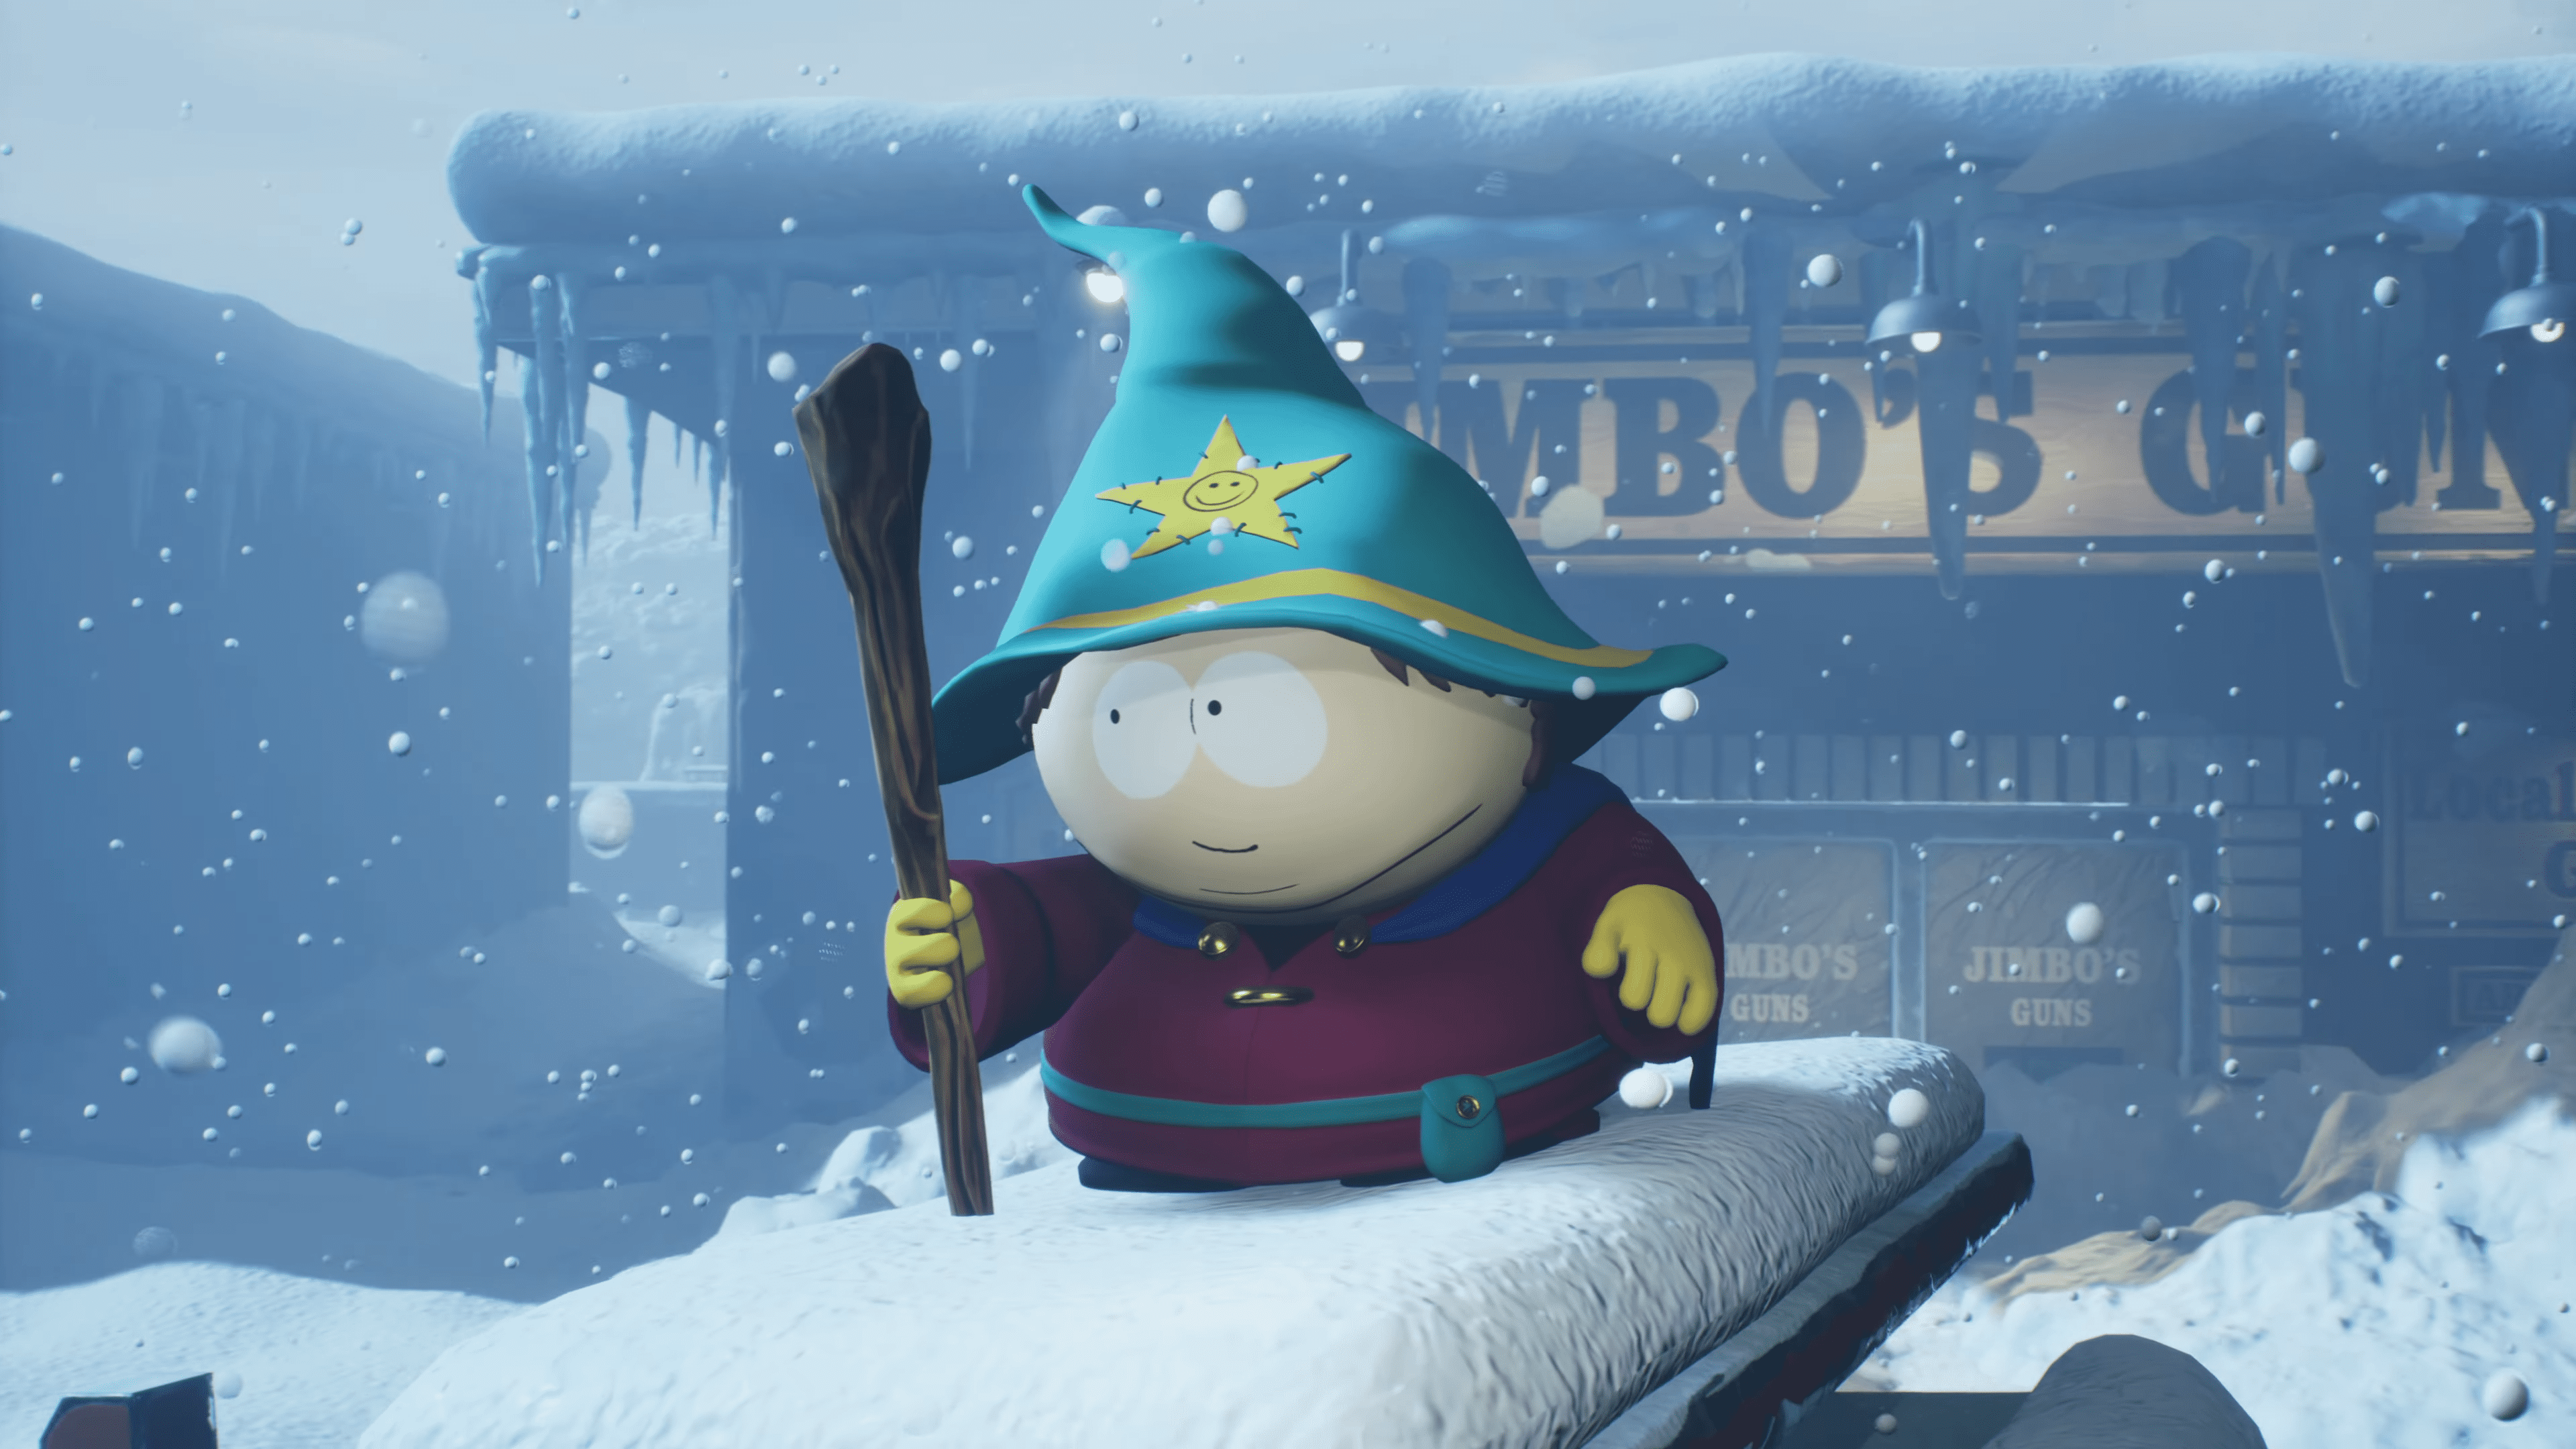 south-park-snow-day-reveal-trailer-0-21-screenshot-1691793934541.png